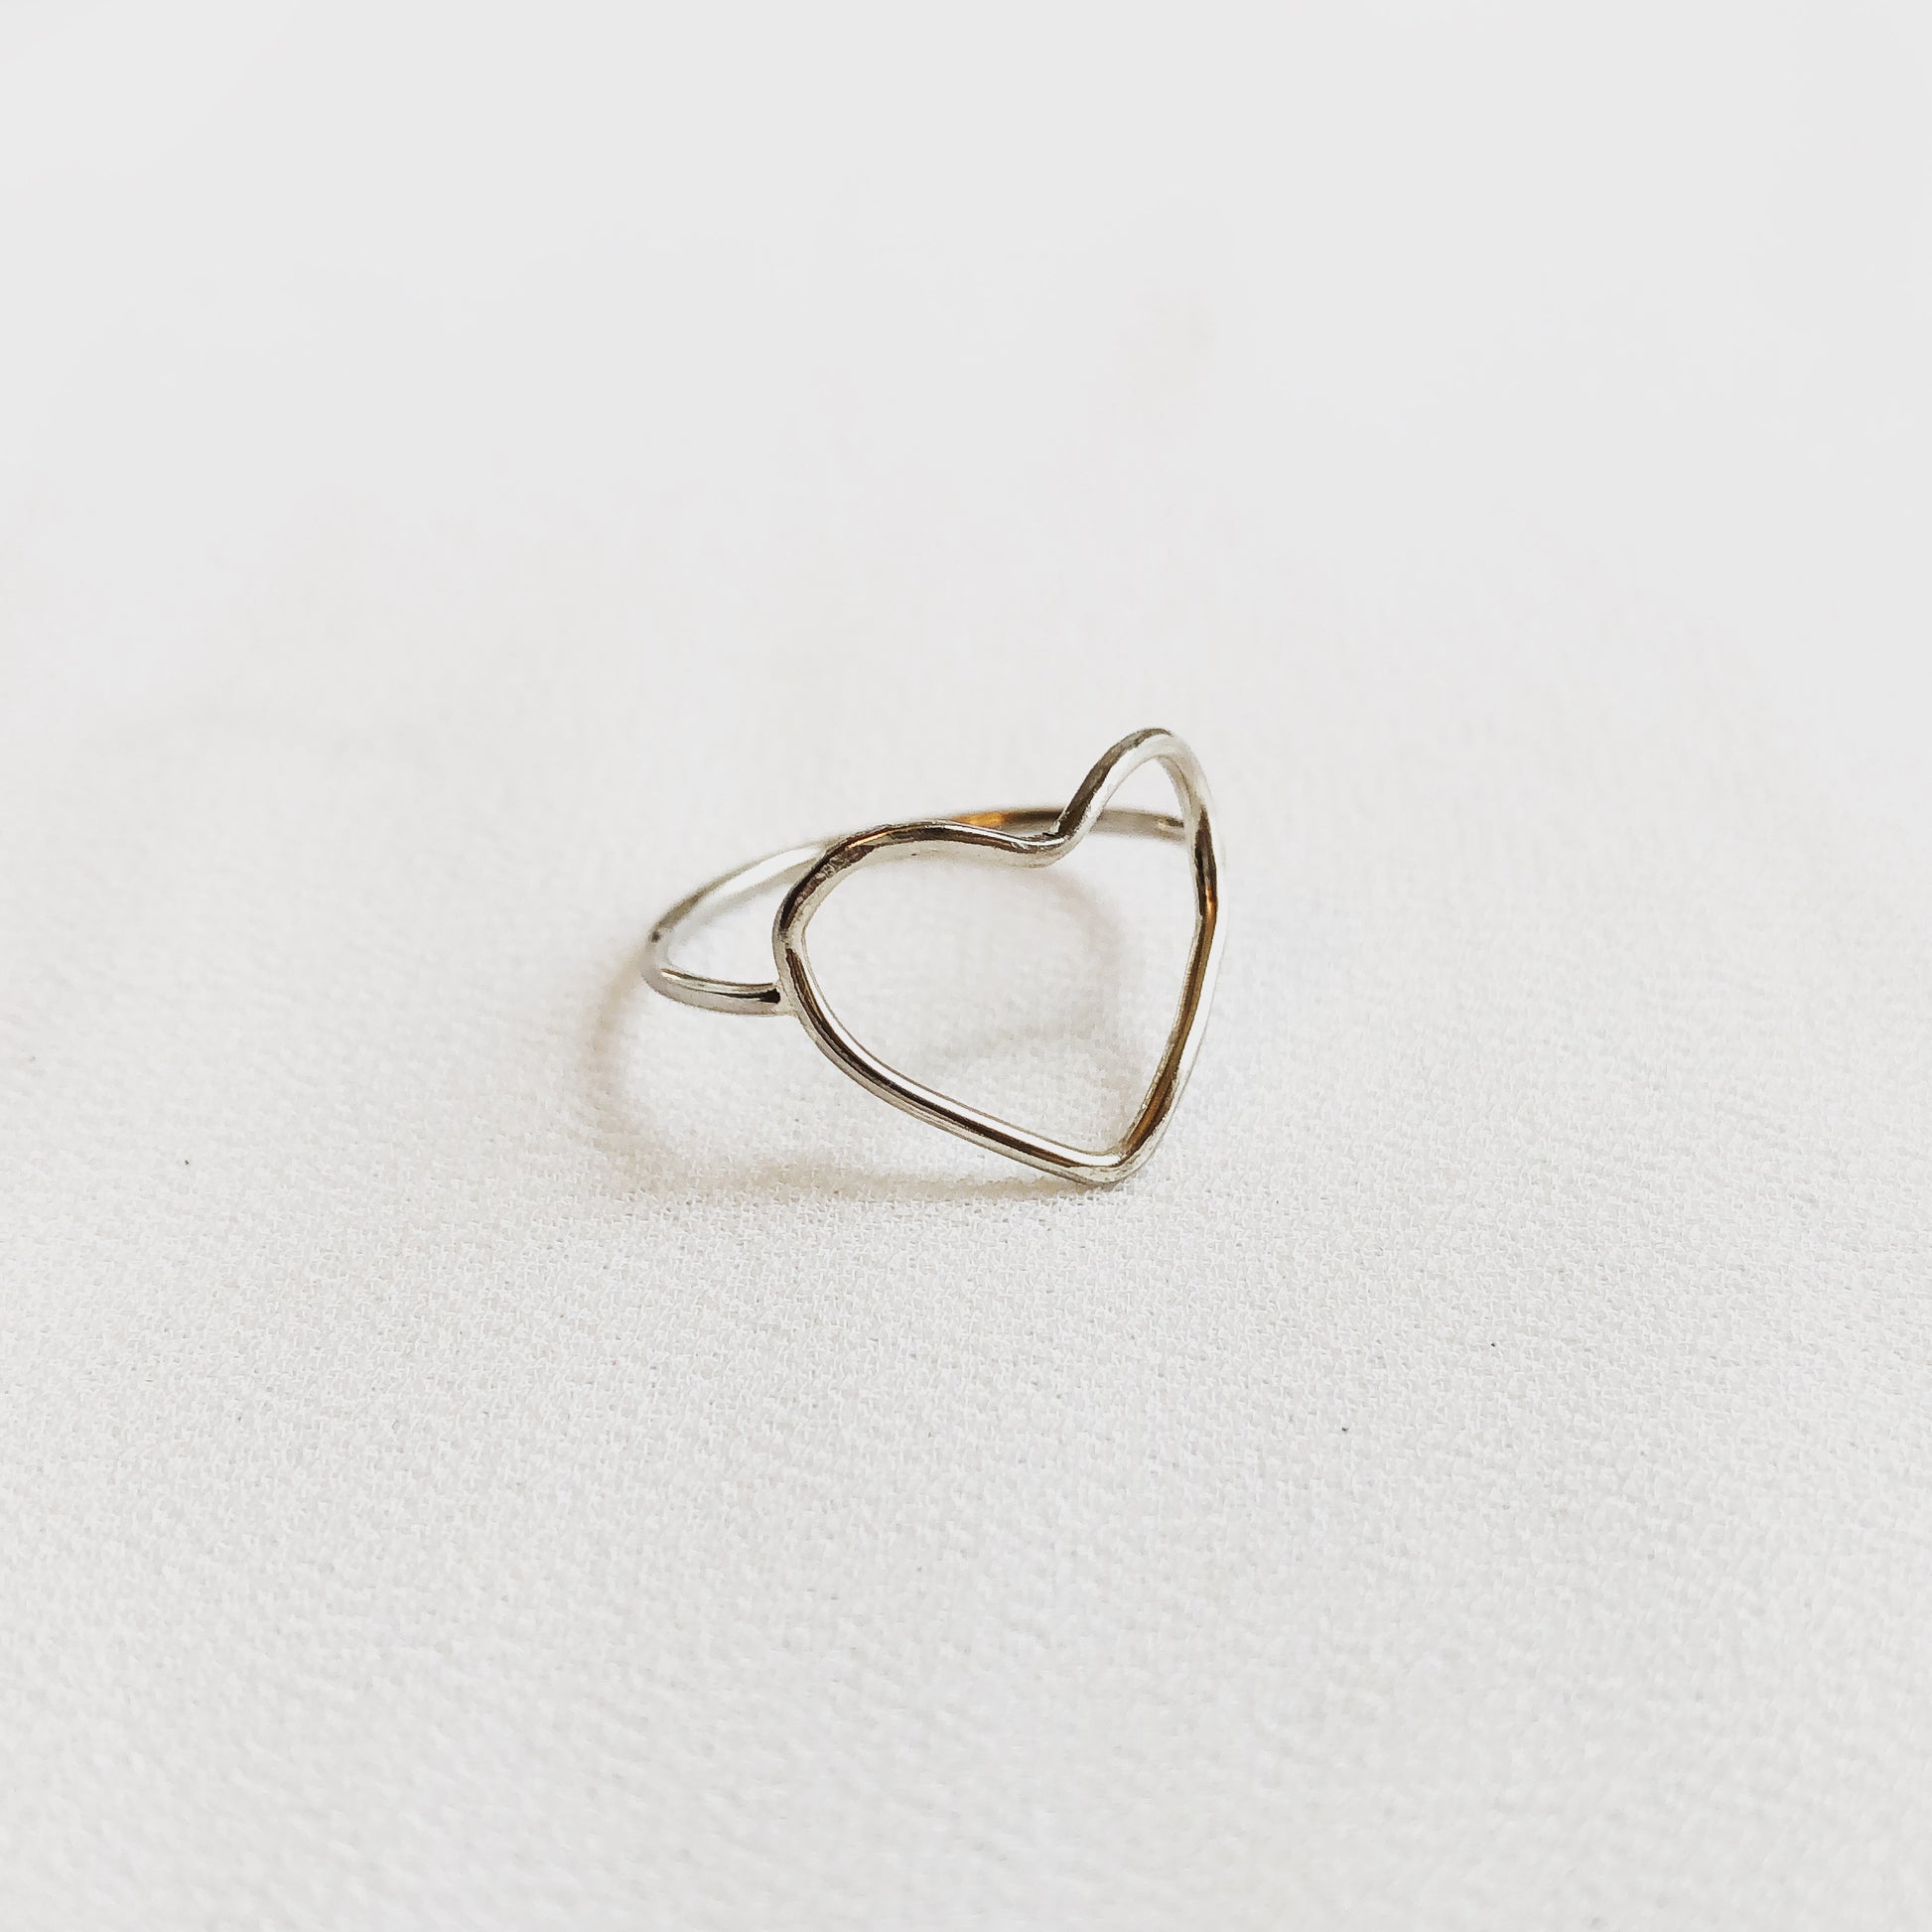 Heart Ring, Open Heart Ring, Sterling Silver Ring, Handmade Ring, Silver Open Heart Ring, Stacking Ring, Dainty Heart Ring, Gift For Her